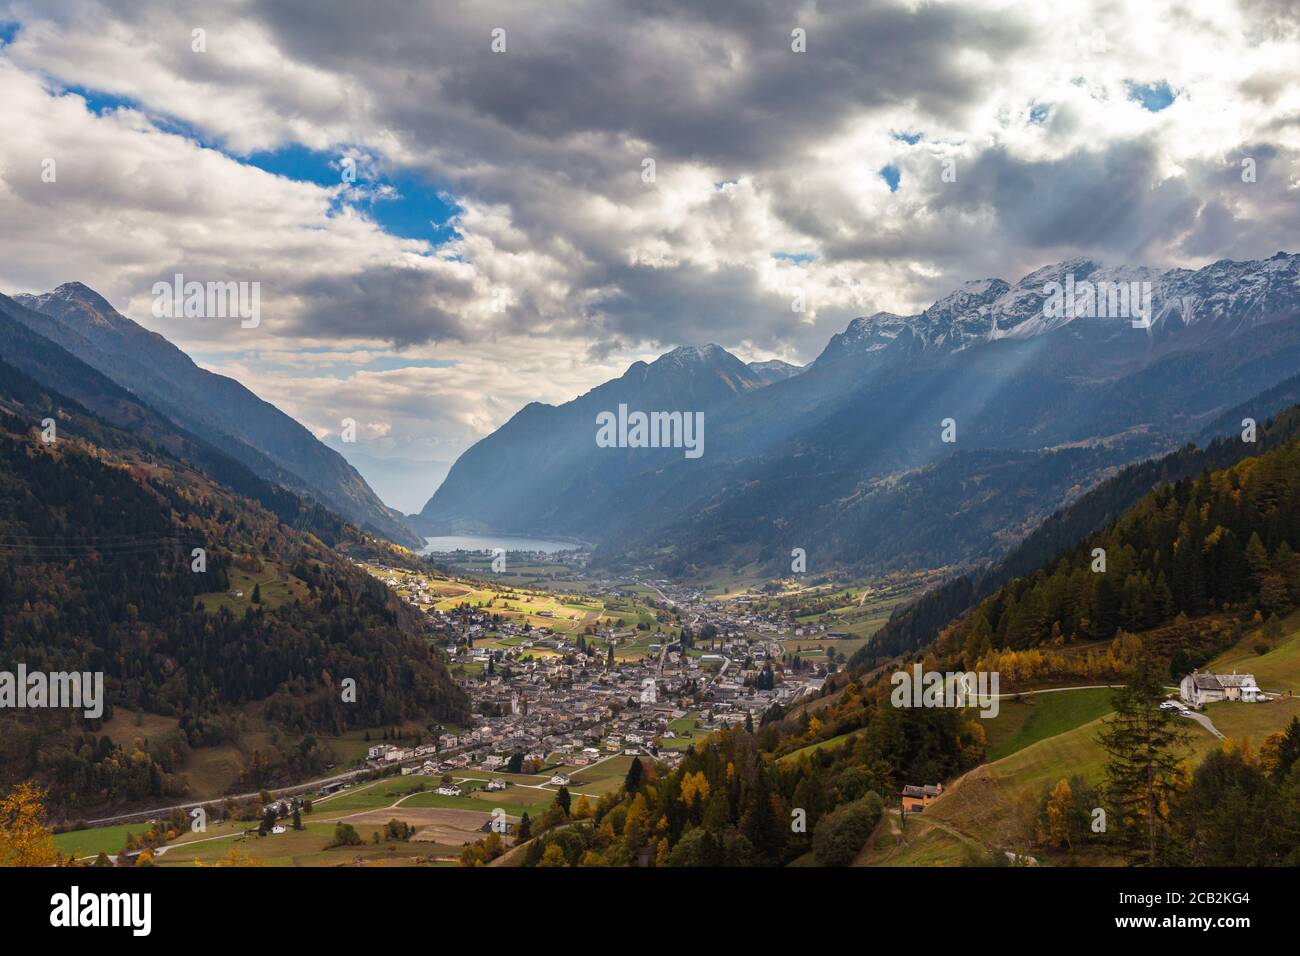 Stunning aerial panorama view of Poschiavo town in valley with Swiss Alps and Lago di Poschiavo lake in background, in autumn on sightseeing railway l Stock Photo